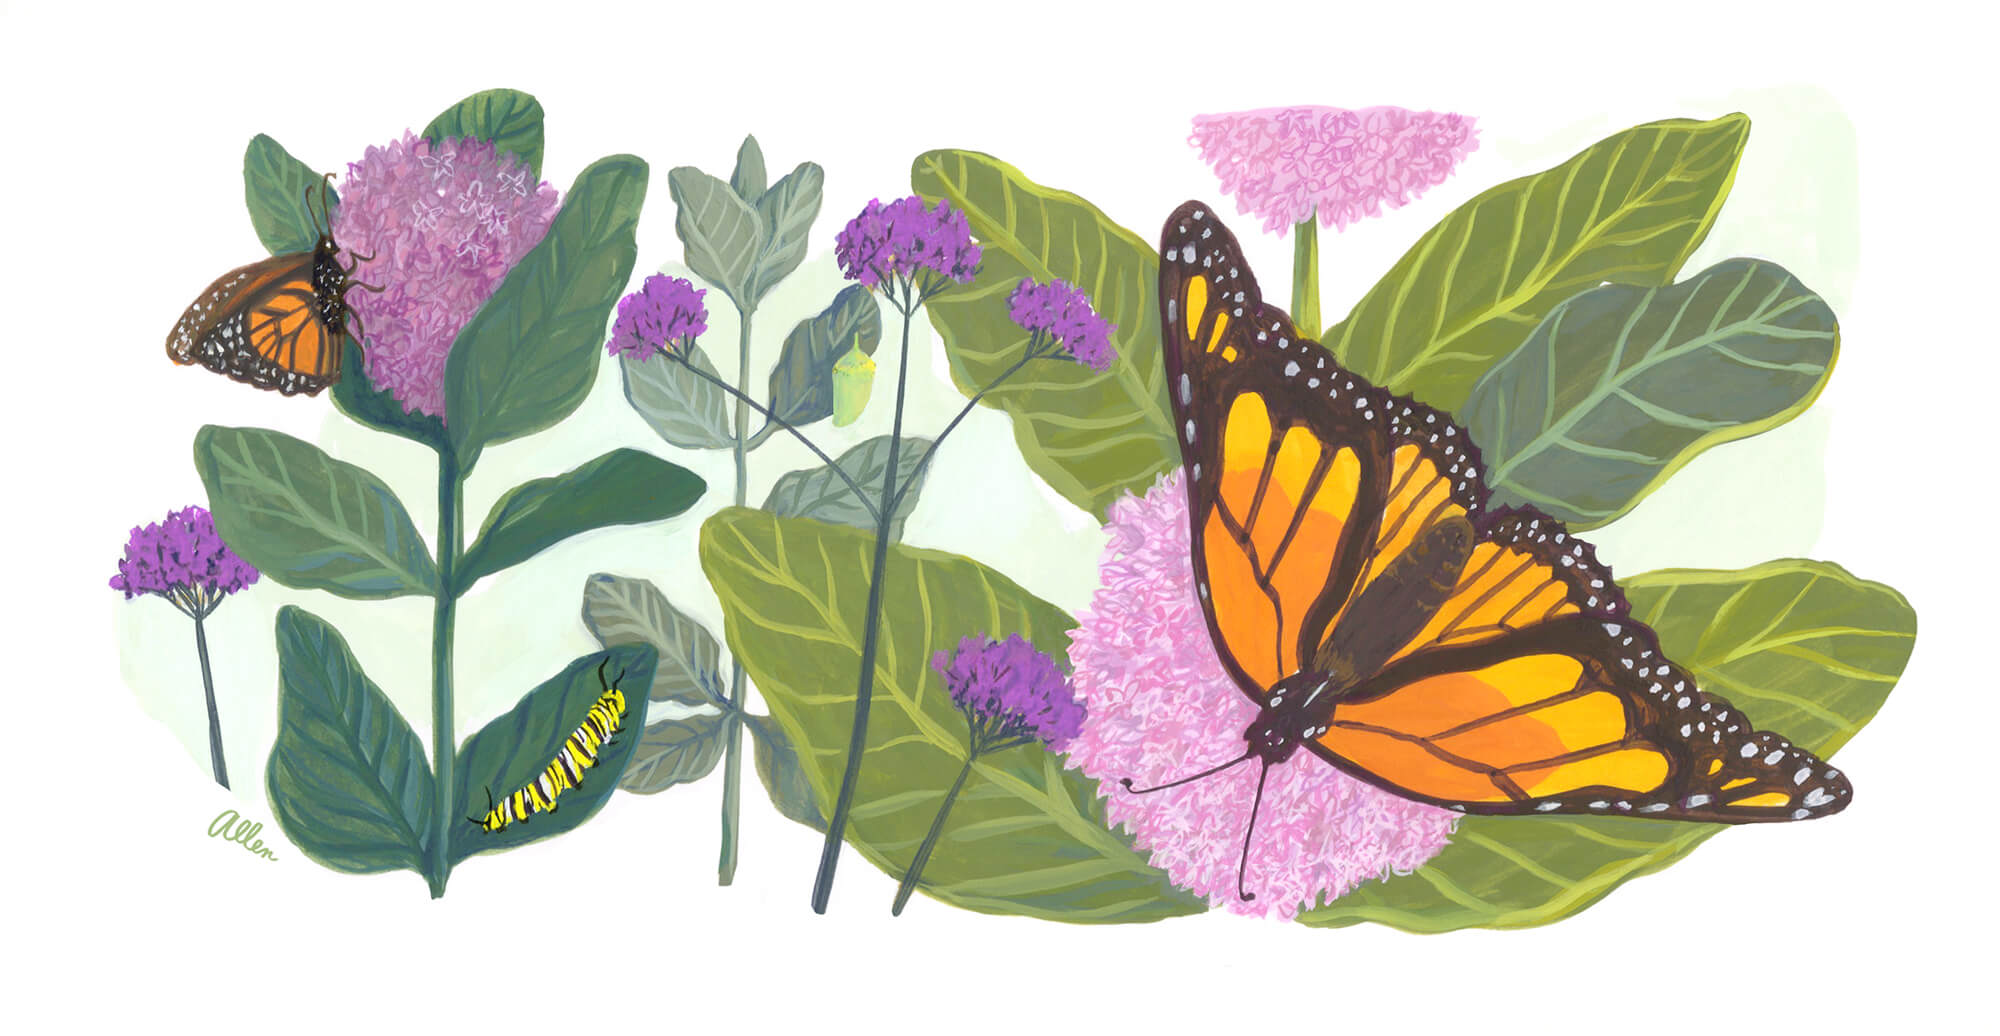 An illustration of an orange butterfly in front of green leafy plants and flowers